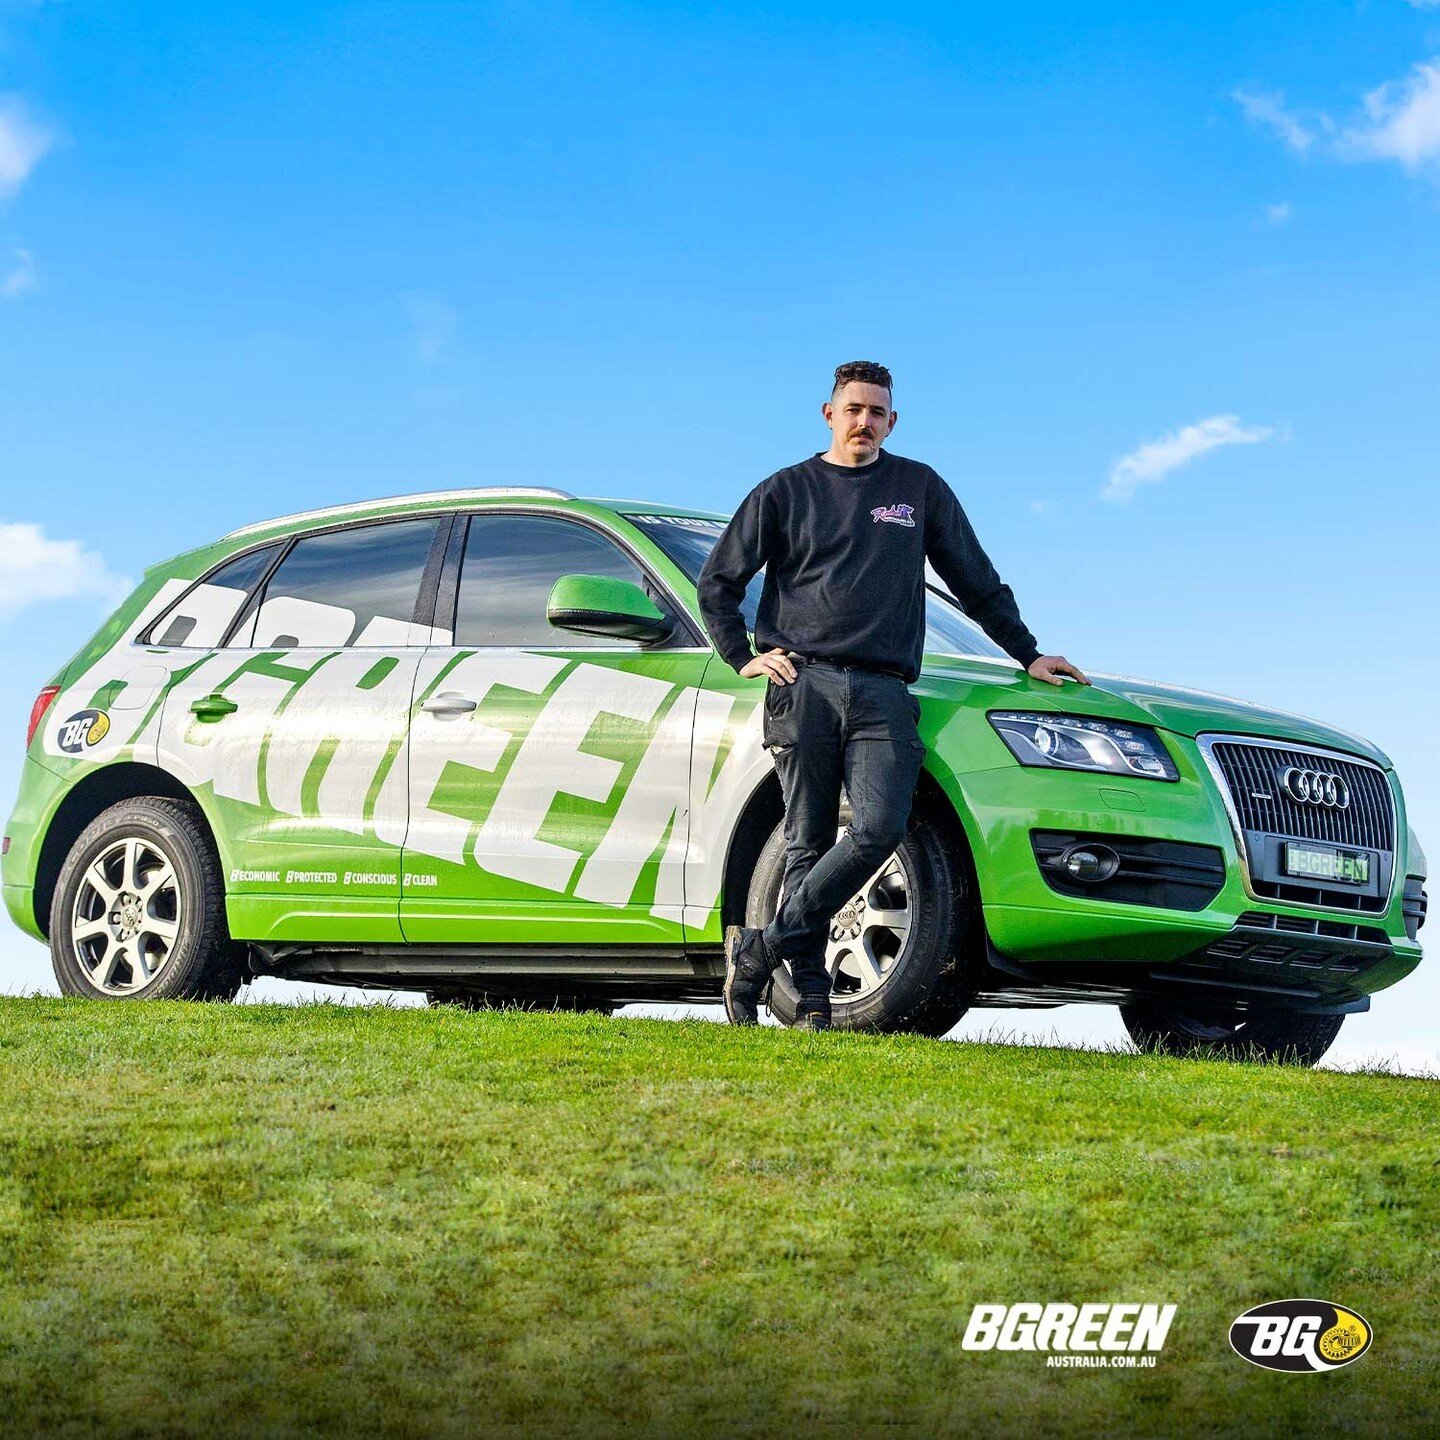 Imagine a world where every vehicle owner is aware of the importance of automotive maintenance. That&rsquo;s our vision!
Learn more at www.bgreenaustralia.com.au

#savemoney #BGAustralia #BGreenAustralia #BGproducts #Australia #clean #economic #prote